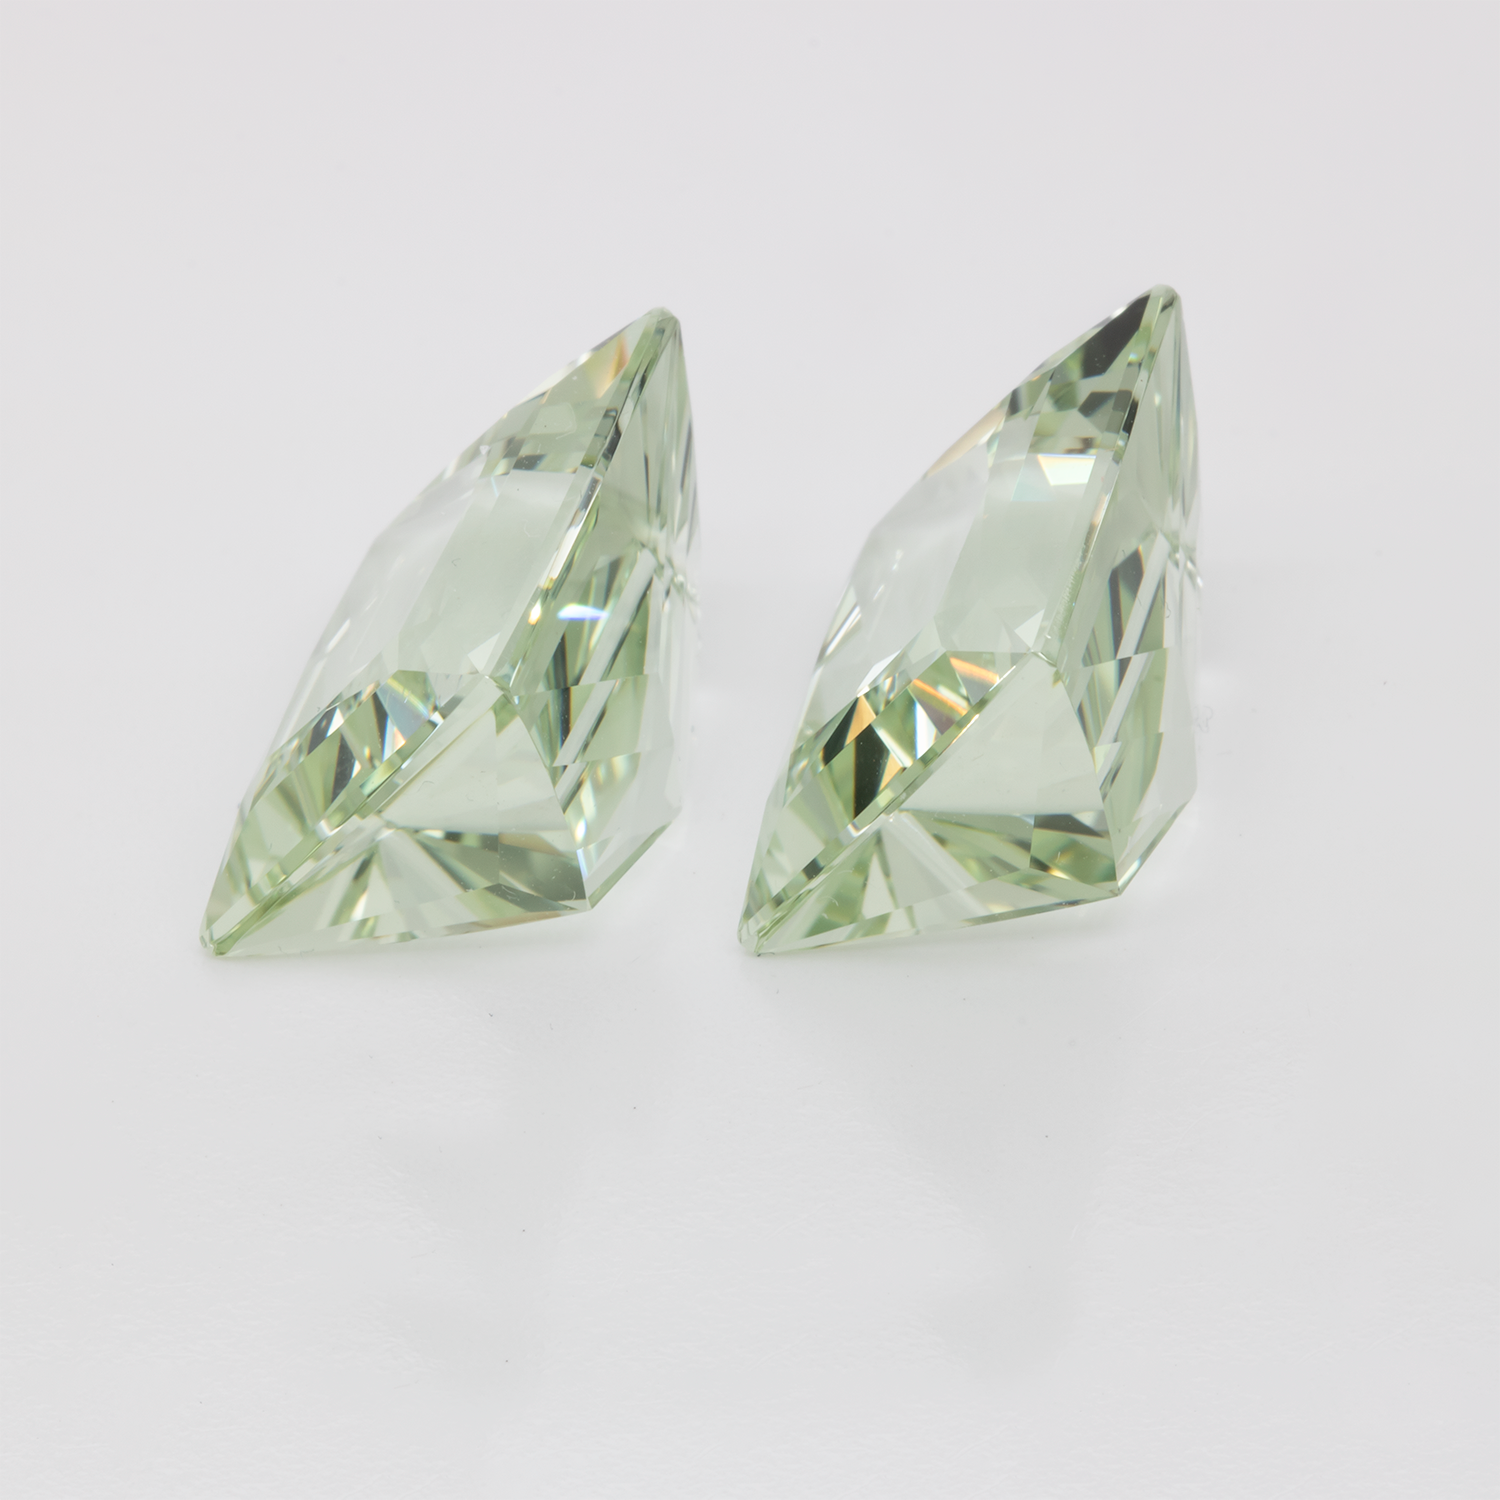 Beryl Pair - green, baguette, 15.5x12.5 mm, 25.1 cts, No. BY90040